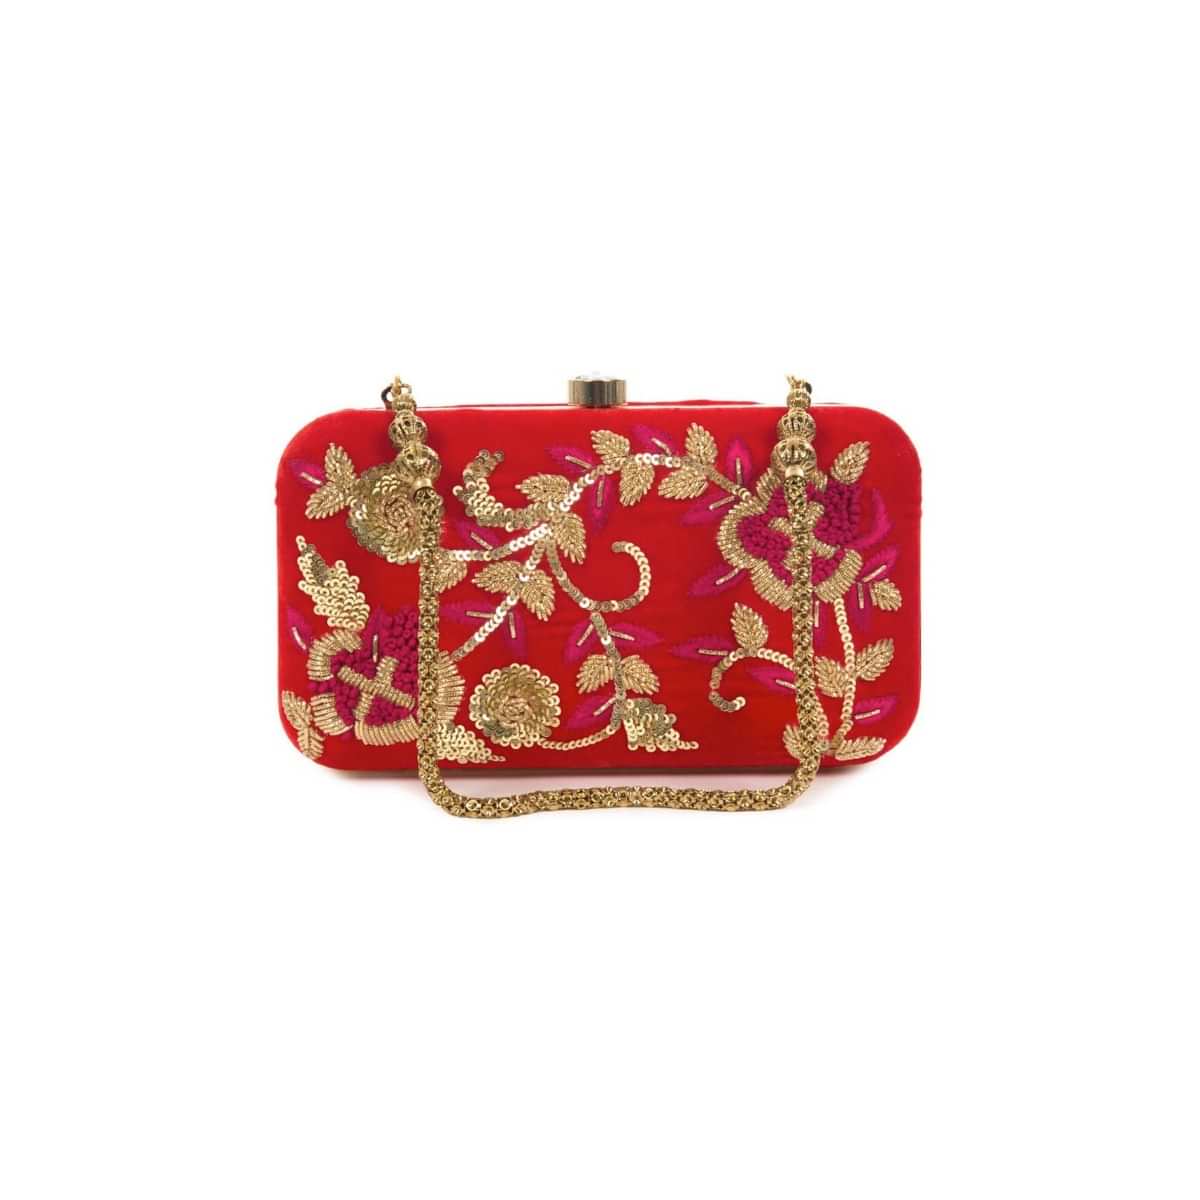 Blood red rectangular clutch adorn in floral embroidery 